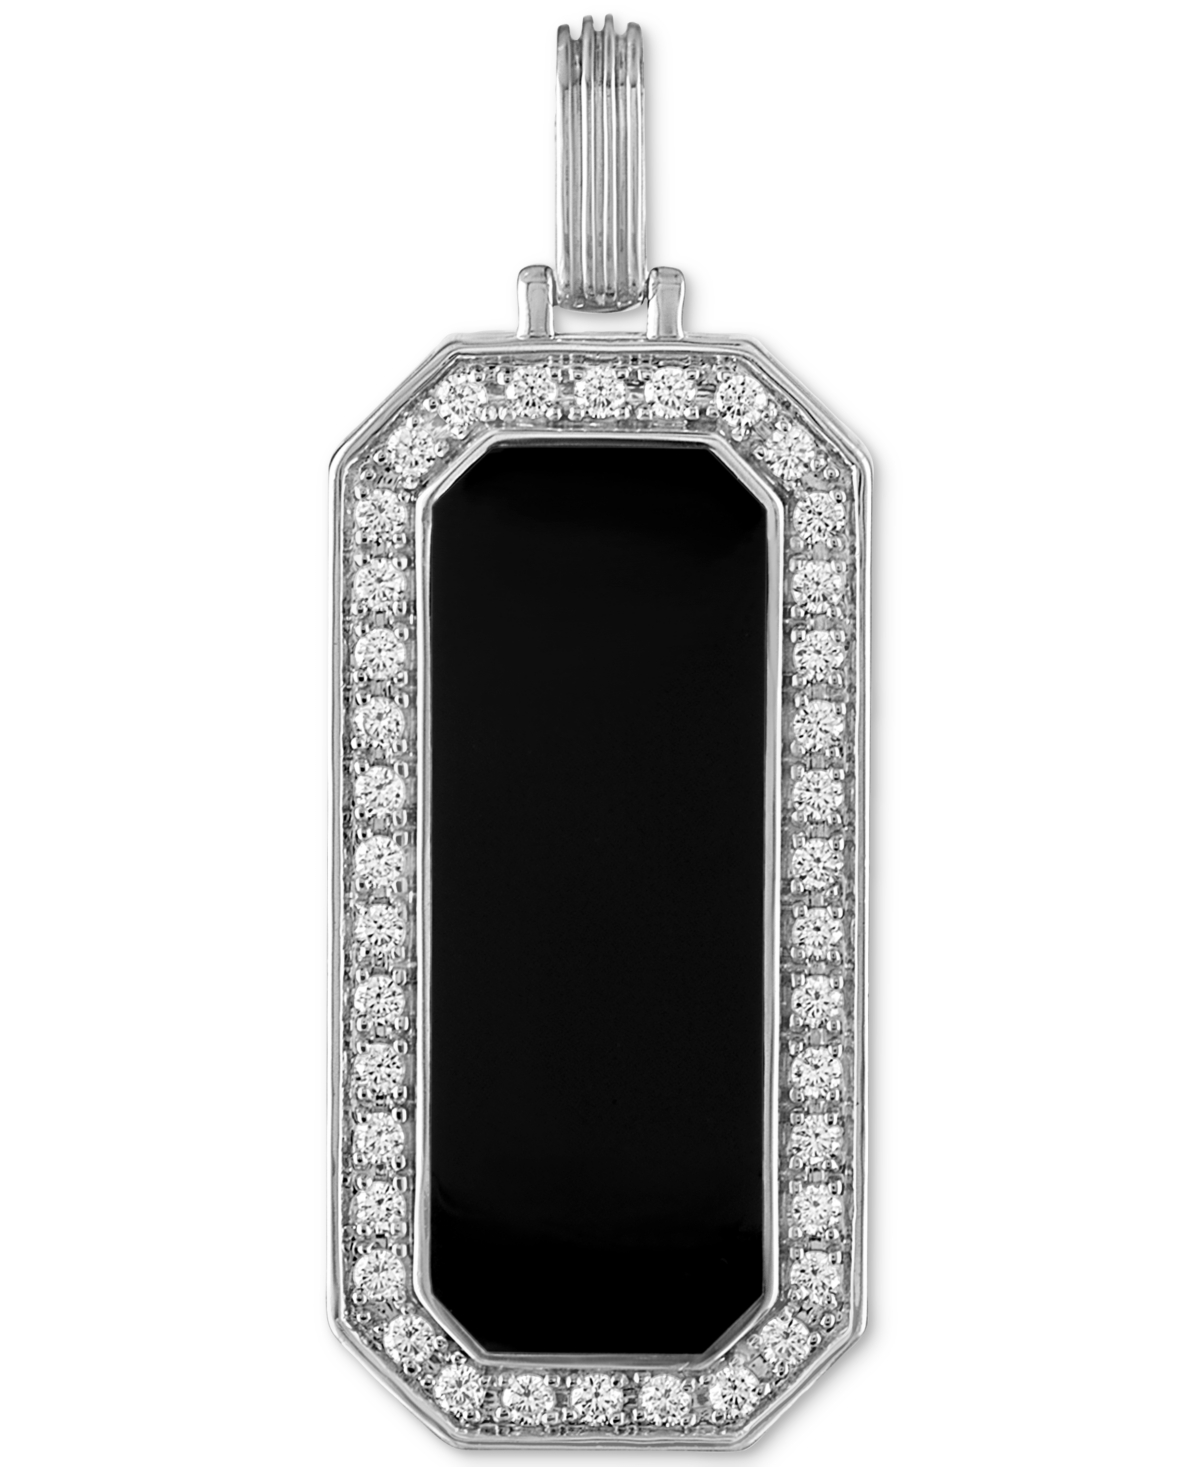 Esquire Men's Jewelry Black Ceramic & Cubic Zirconia Pendant In Sterling Silver, Created For Macy's